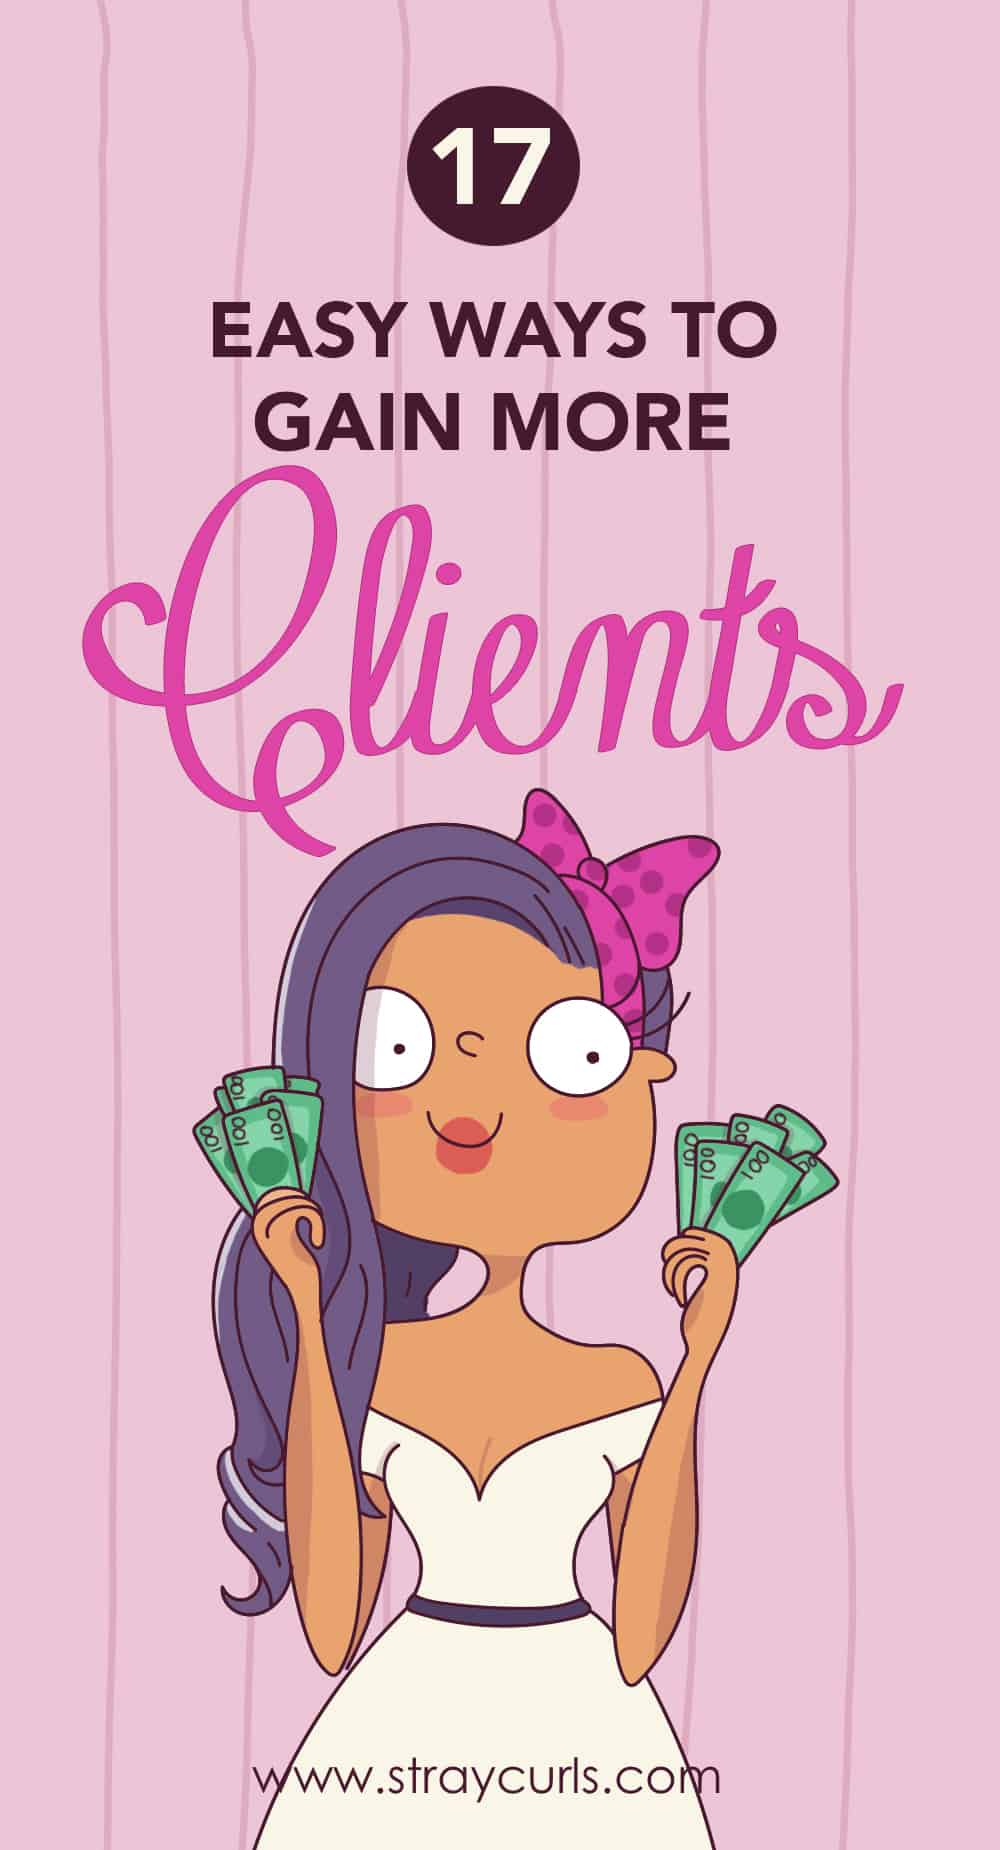 17 Easy Ways to Get More Clients (And Be Booked Out For Months) Learn how to get clients and earn money online as a Freelancer. I will show you how to get clients fast online via facebook groups and so much more! This post helps you identify your ideal client and several strategies to gain clients. #startablog #bloggingtips #freelance #freelancetips #girlboss #marketing #entrepreneur #people #socialmedia